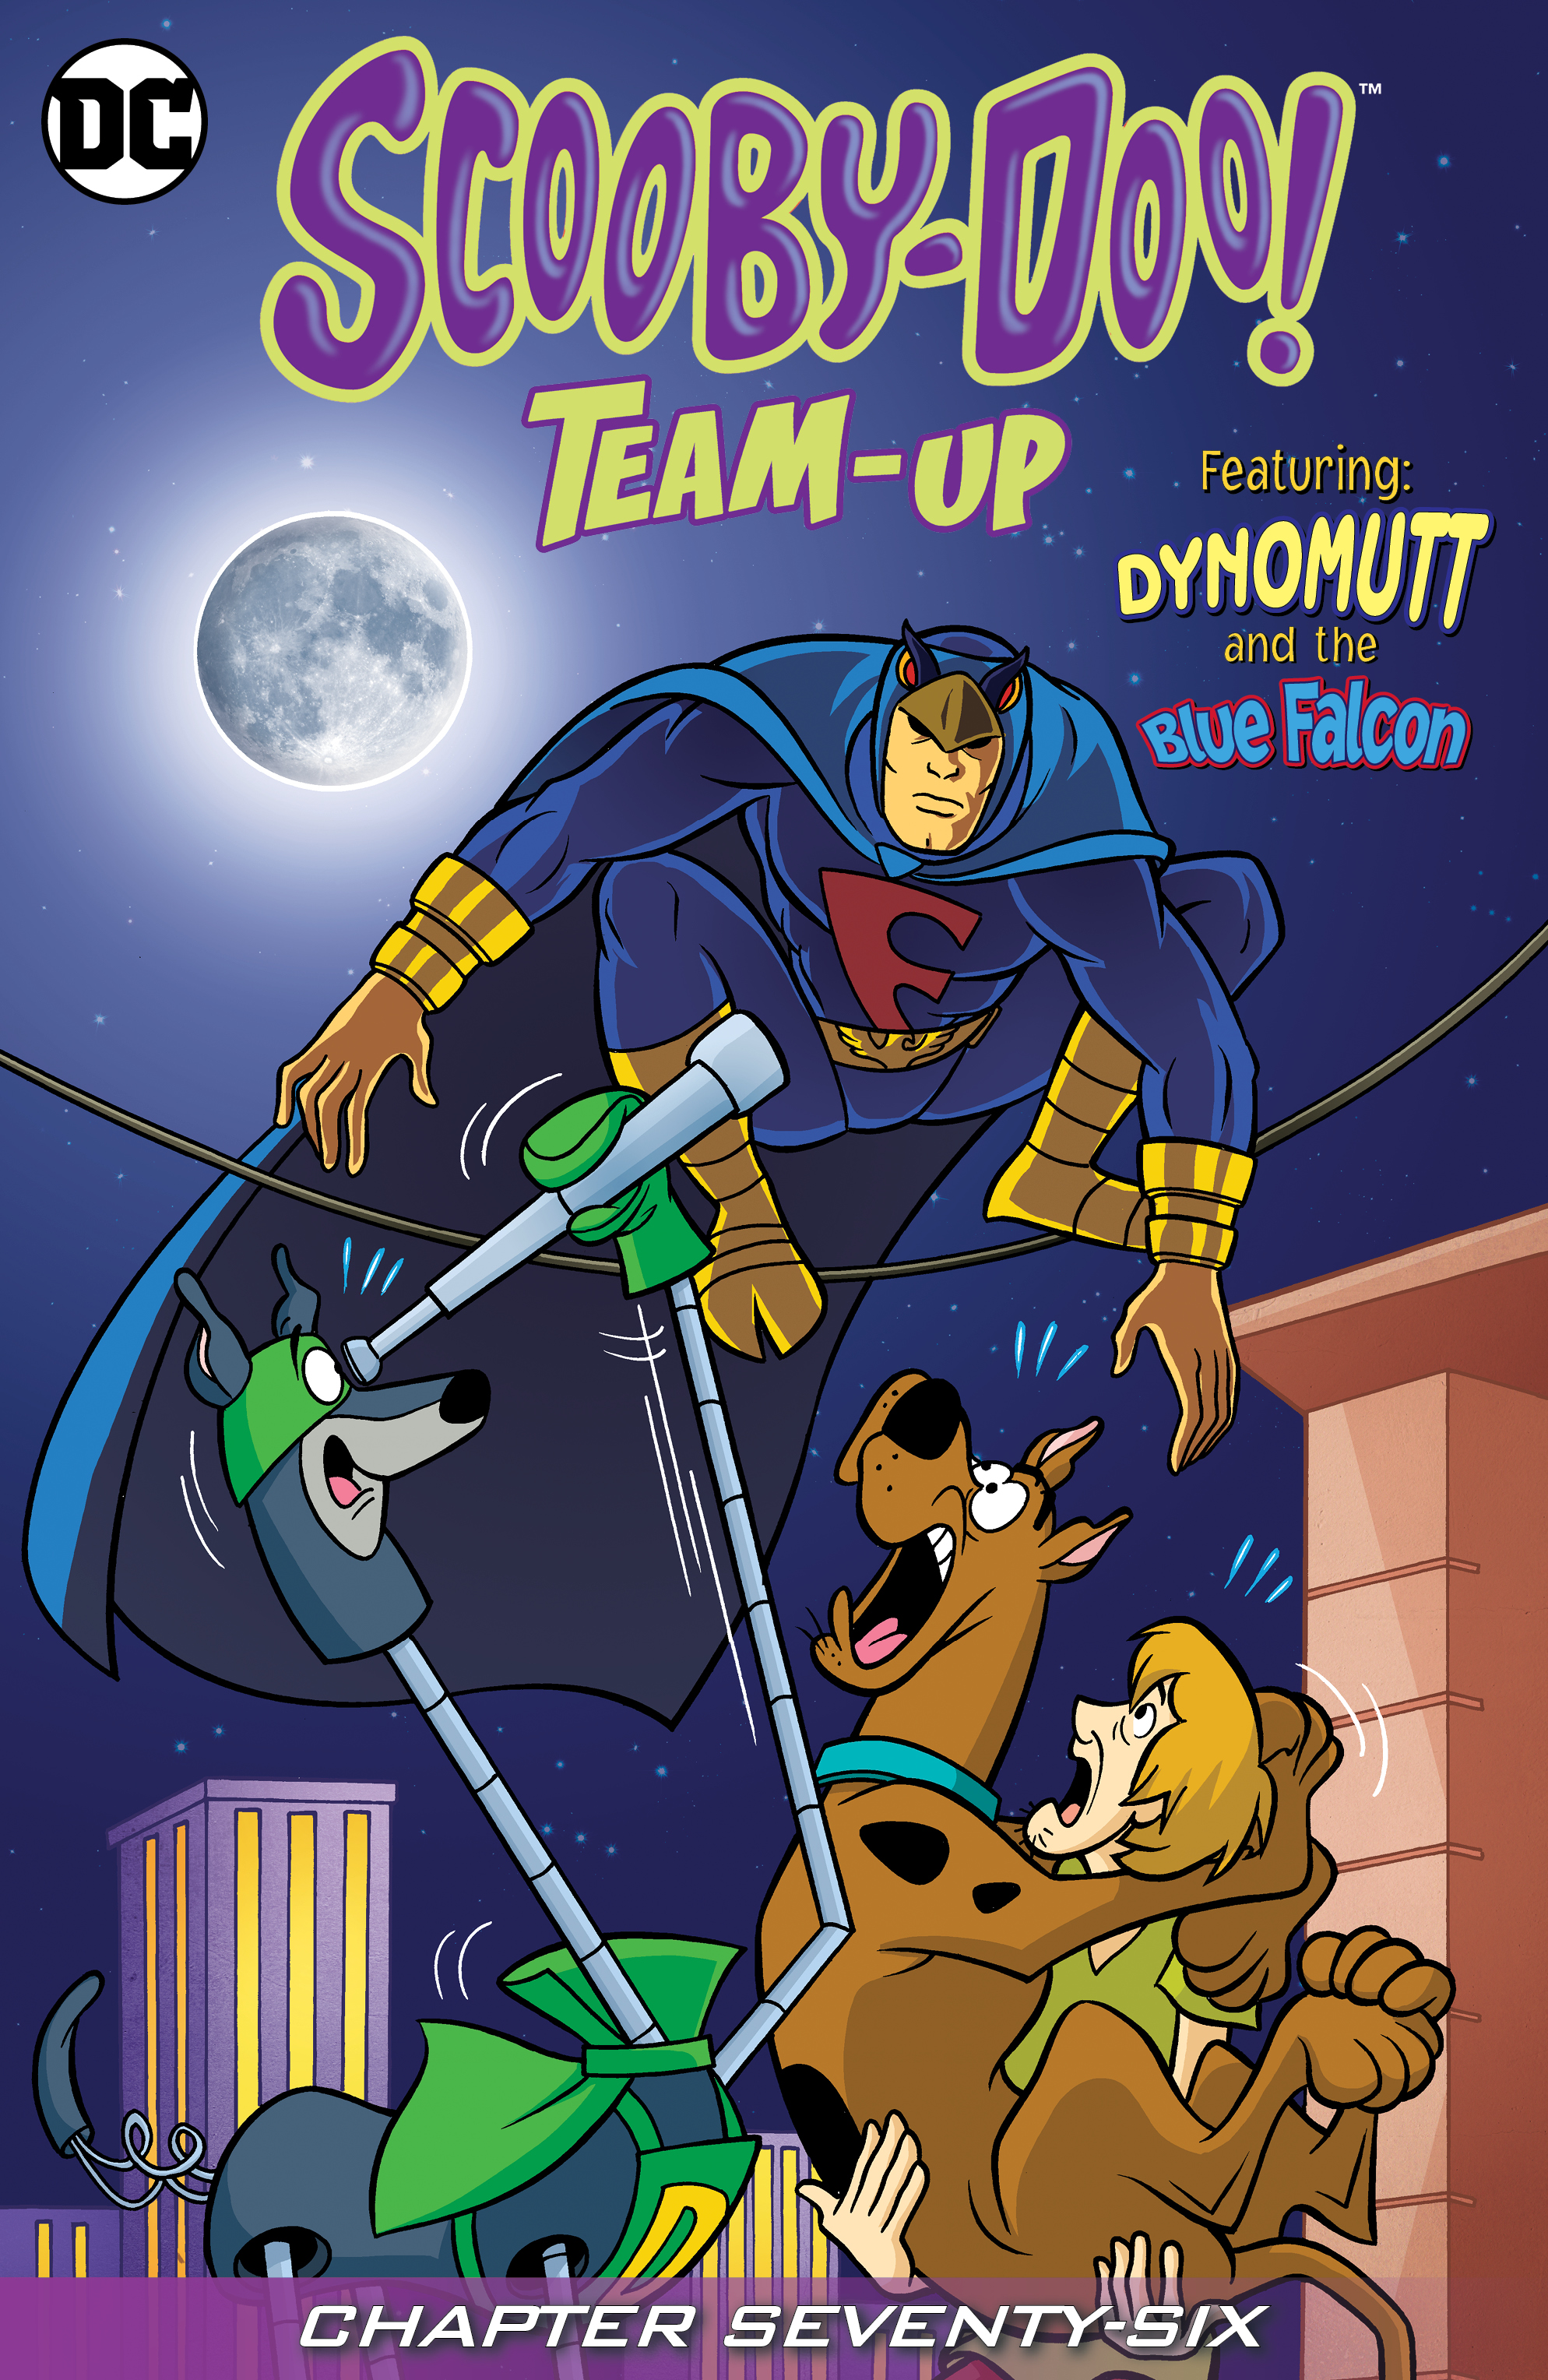 Scooby-Doo Team-Up #76 preview images